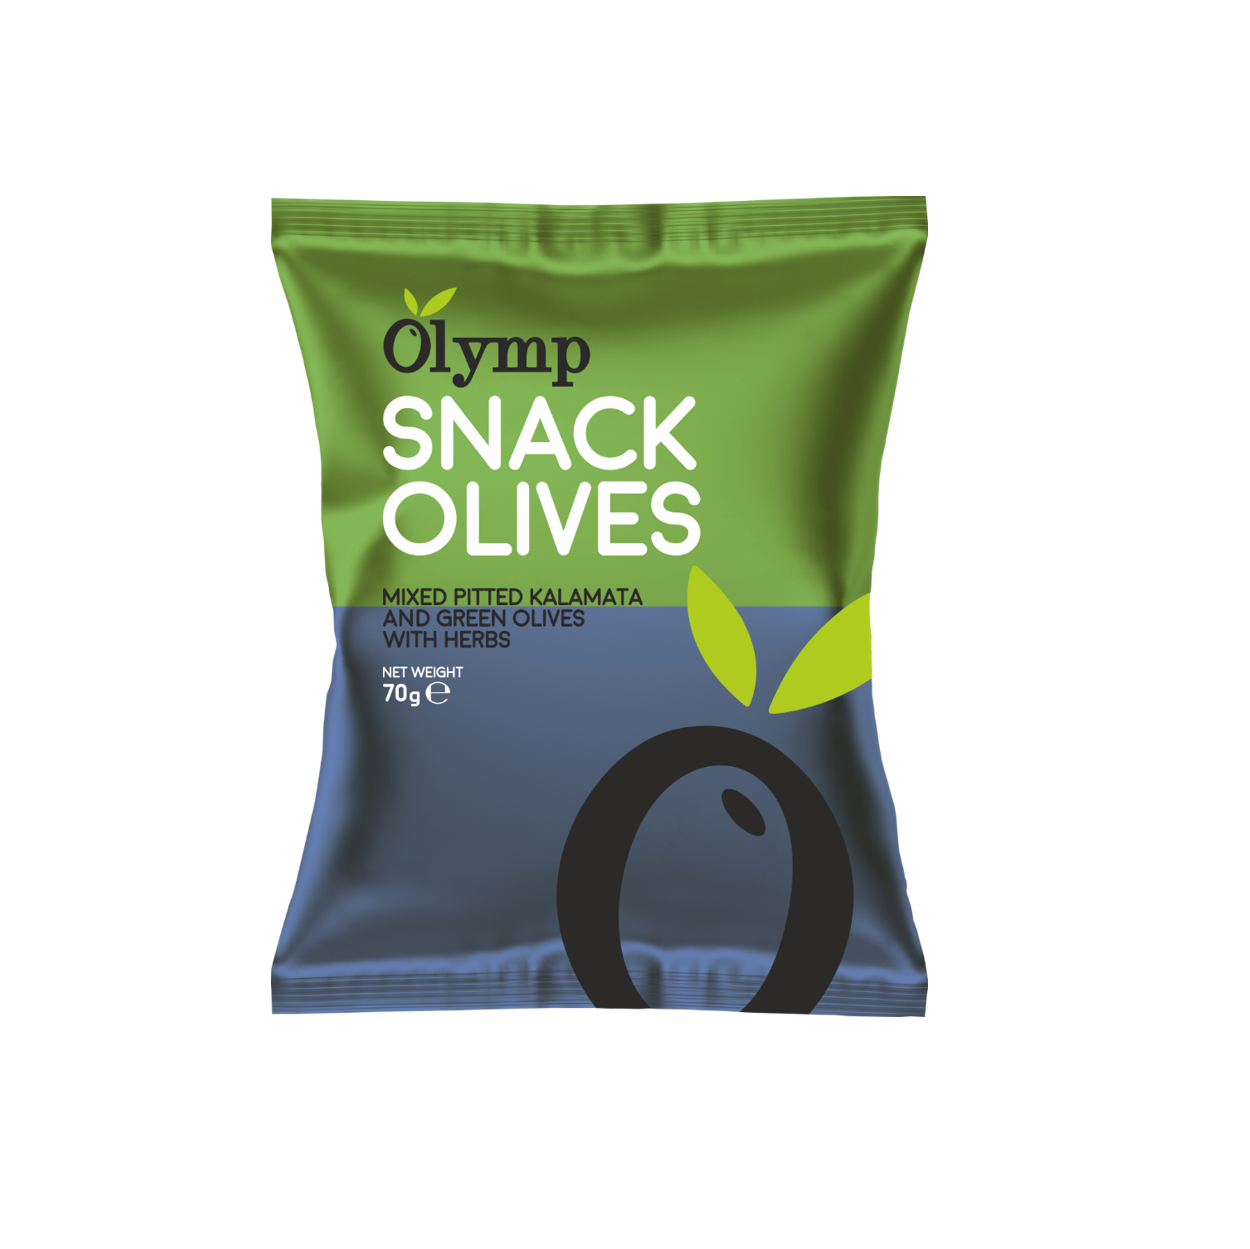 Olymp mix snack olives